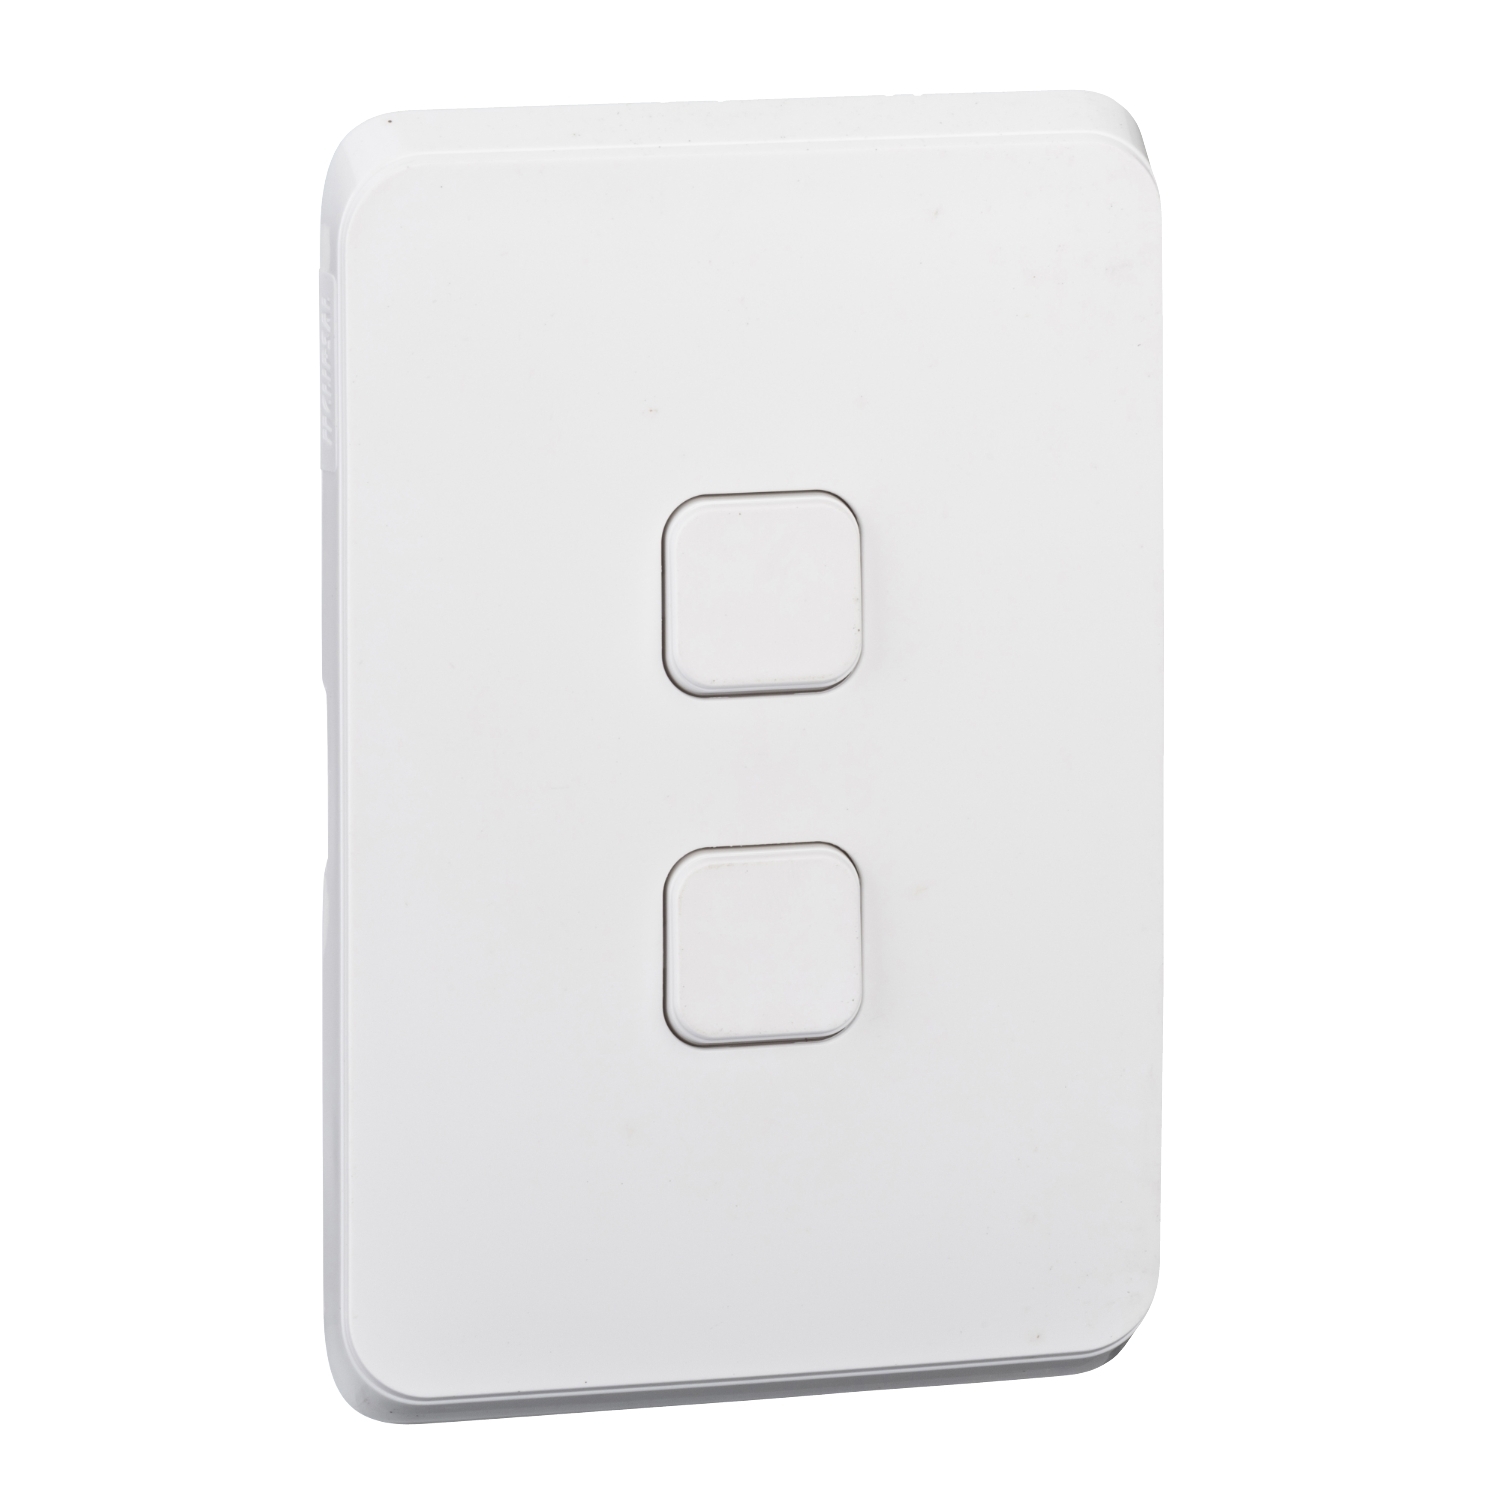 PDL Iconic - Cover Plate Switch 2-Gang - Solid White